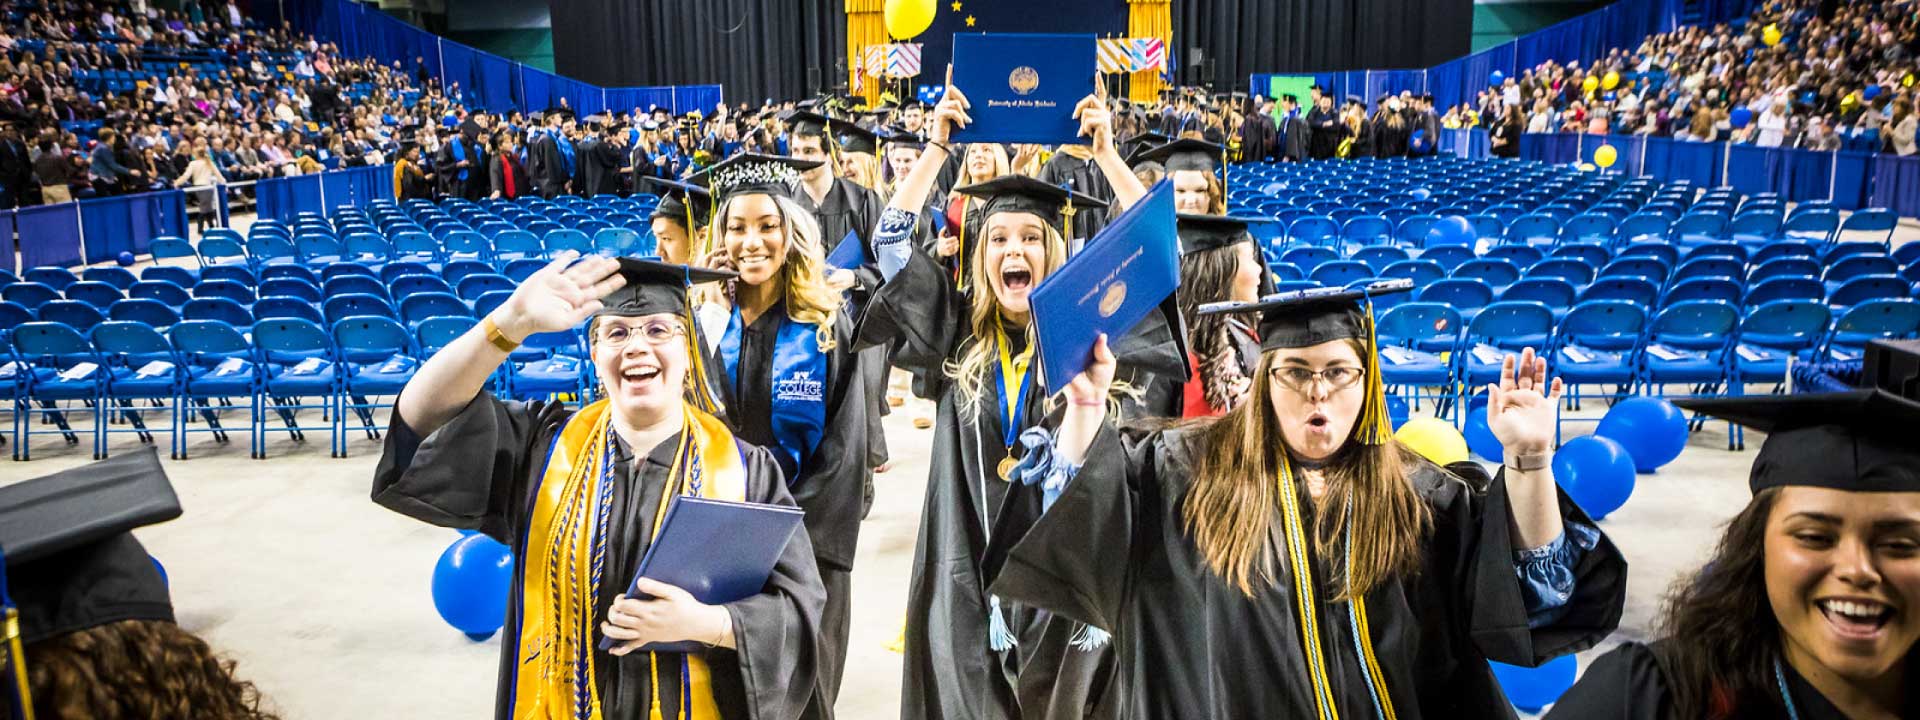 Celebrating students proceed out of the Carlson Center after the 2018 commencement ceremony